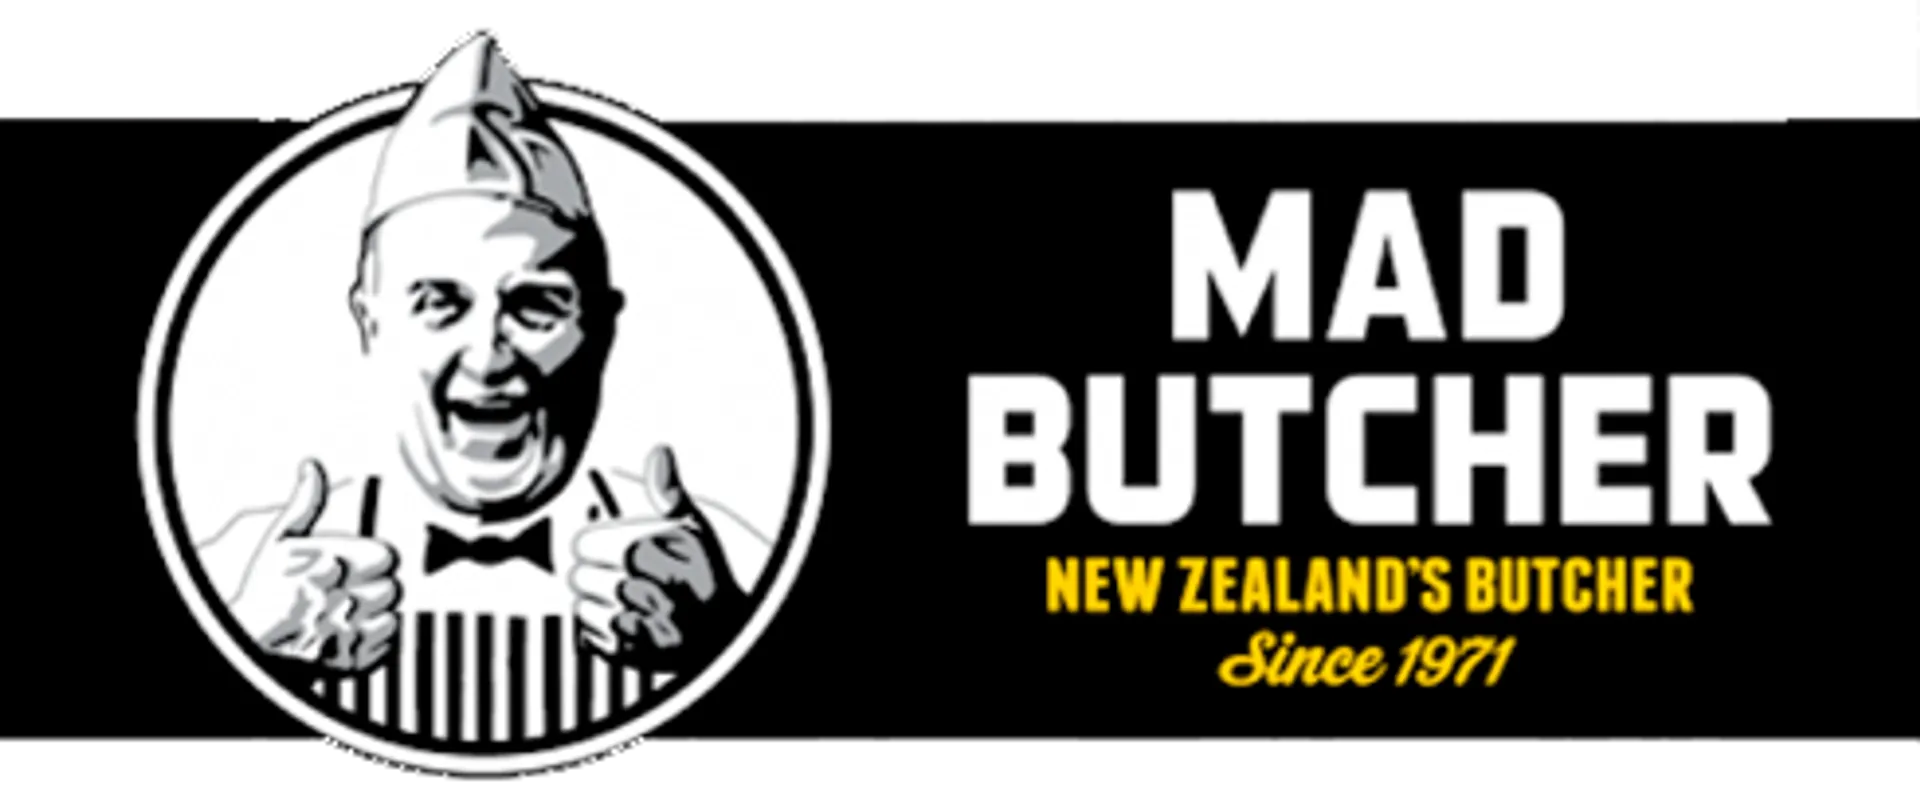 MAD BUTCHER logo current weekly ad